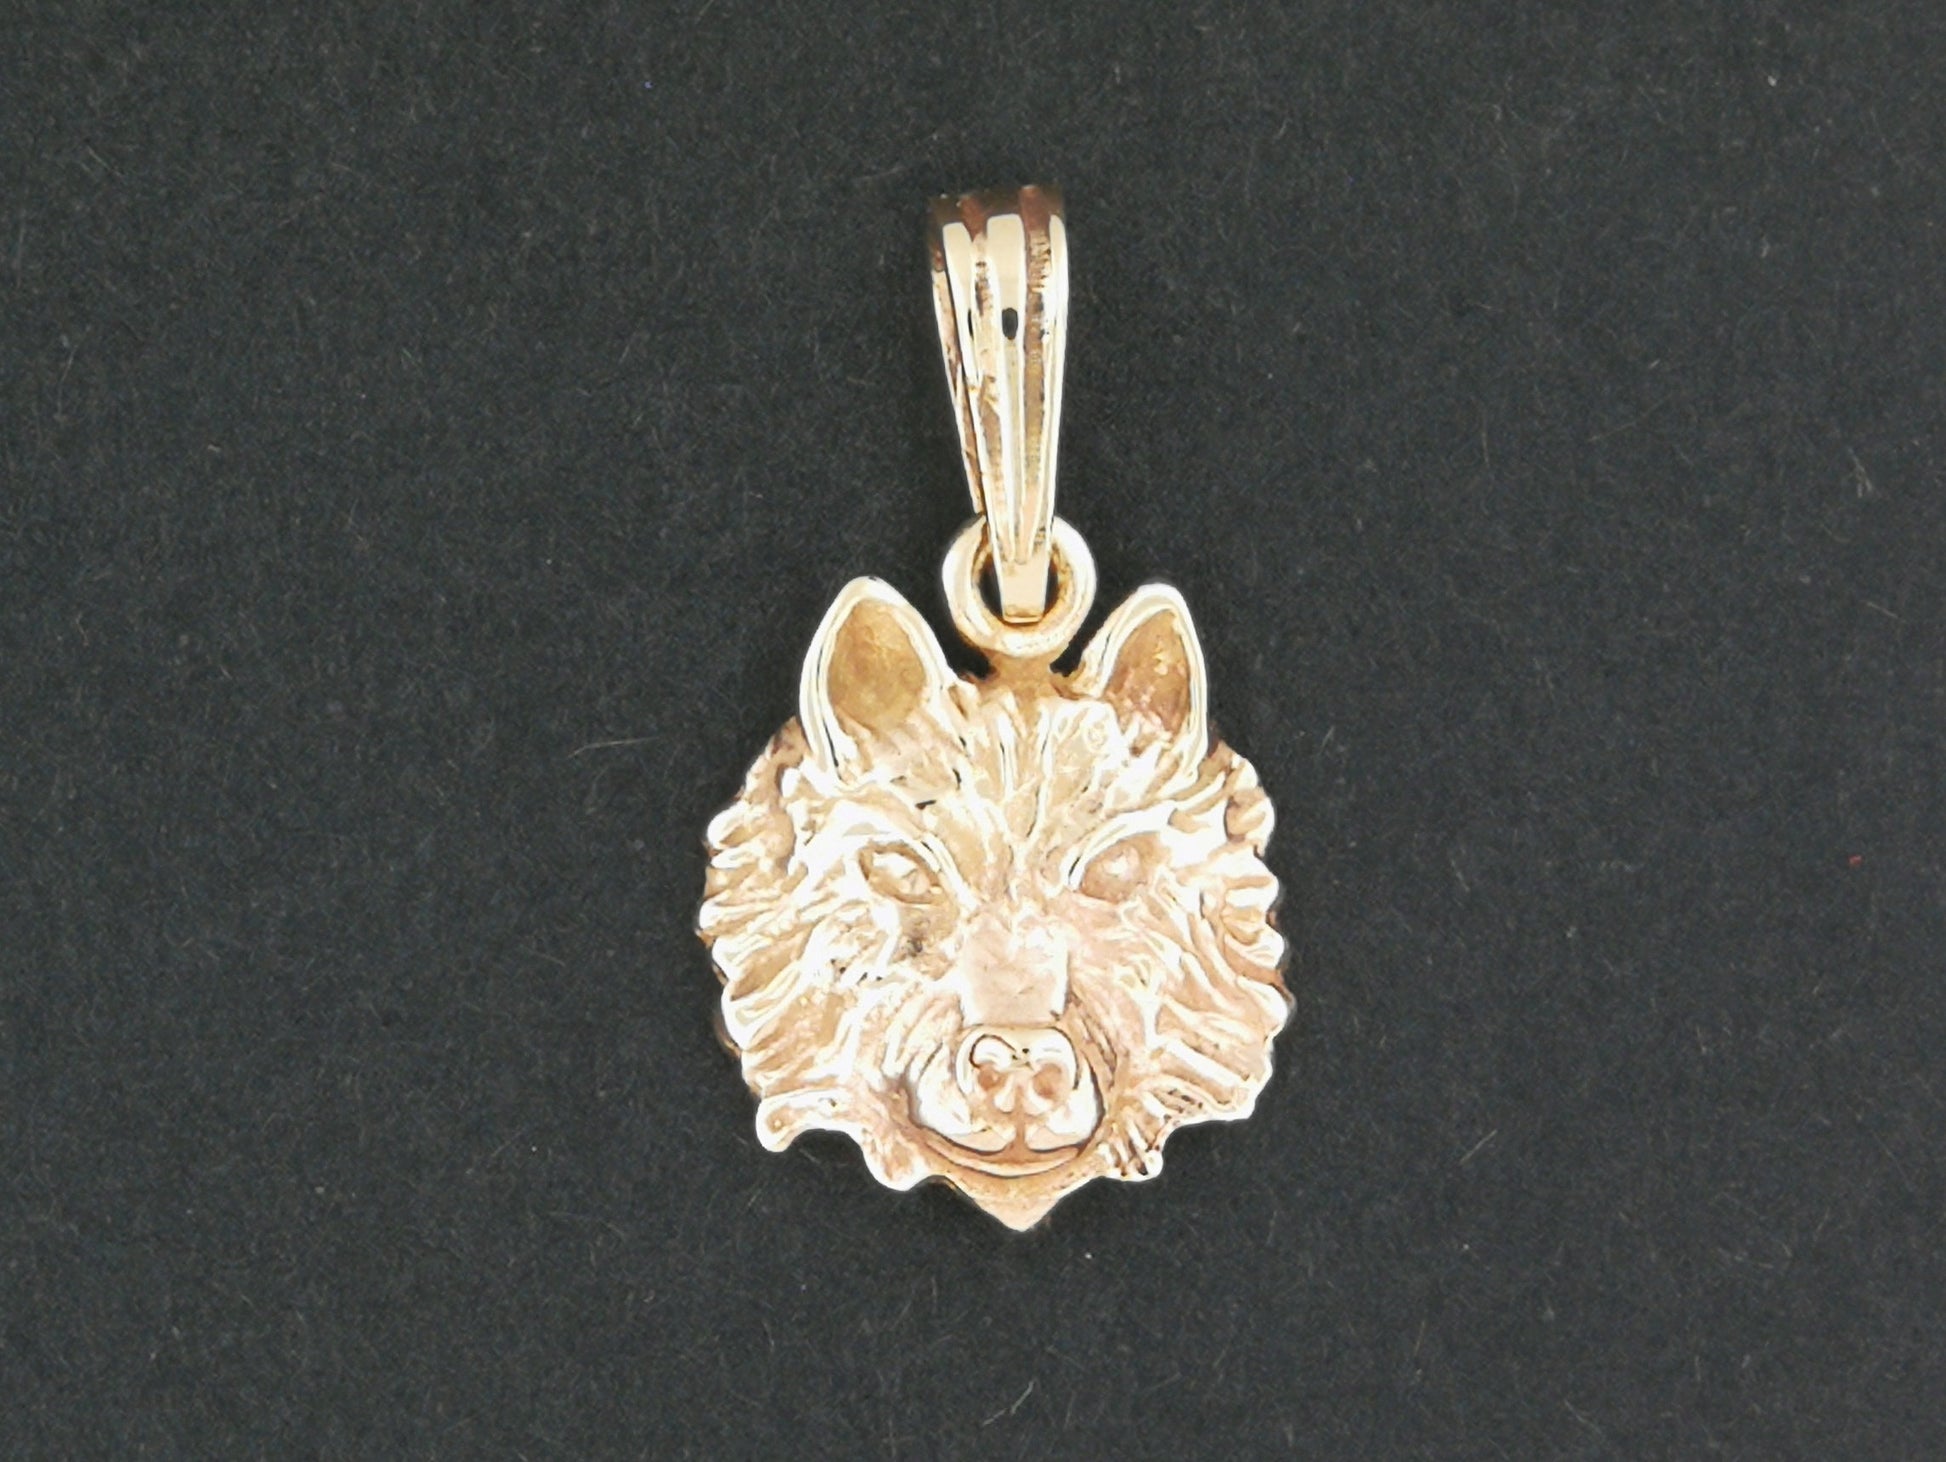 Wolf Head Charm Pendant in Sterling Silver or Antique Bronze, Wolf Head Pendant, Silver Wolf Pendant, Bronze Wolf Pendant, Bronze Wolf Head Pendant, Silver Wolf Head Pendant, Silver Wolf Jewelry, Silver Wolf Jewellery, Bronze Wolf Jewelry, Bronze Wolf Jewellery, Bronze Wolf Charm, Silver Wolf Charm